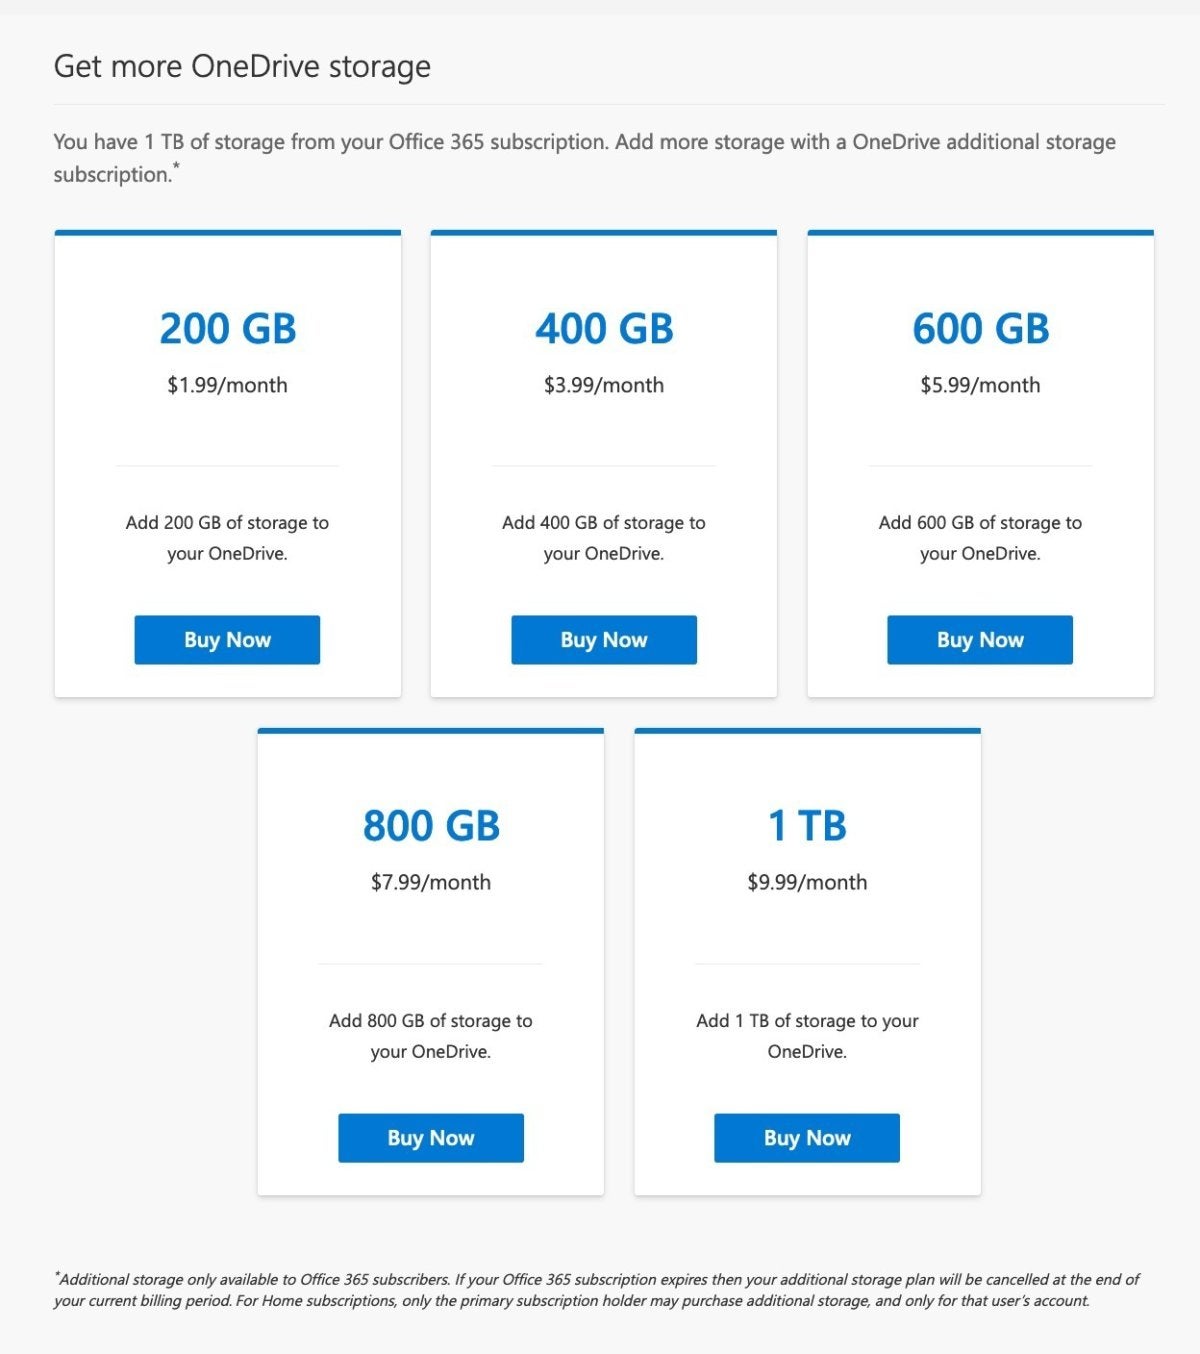 How Much Does Onedrive Cost Uk?